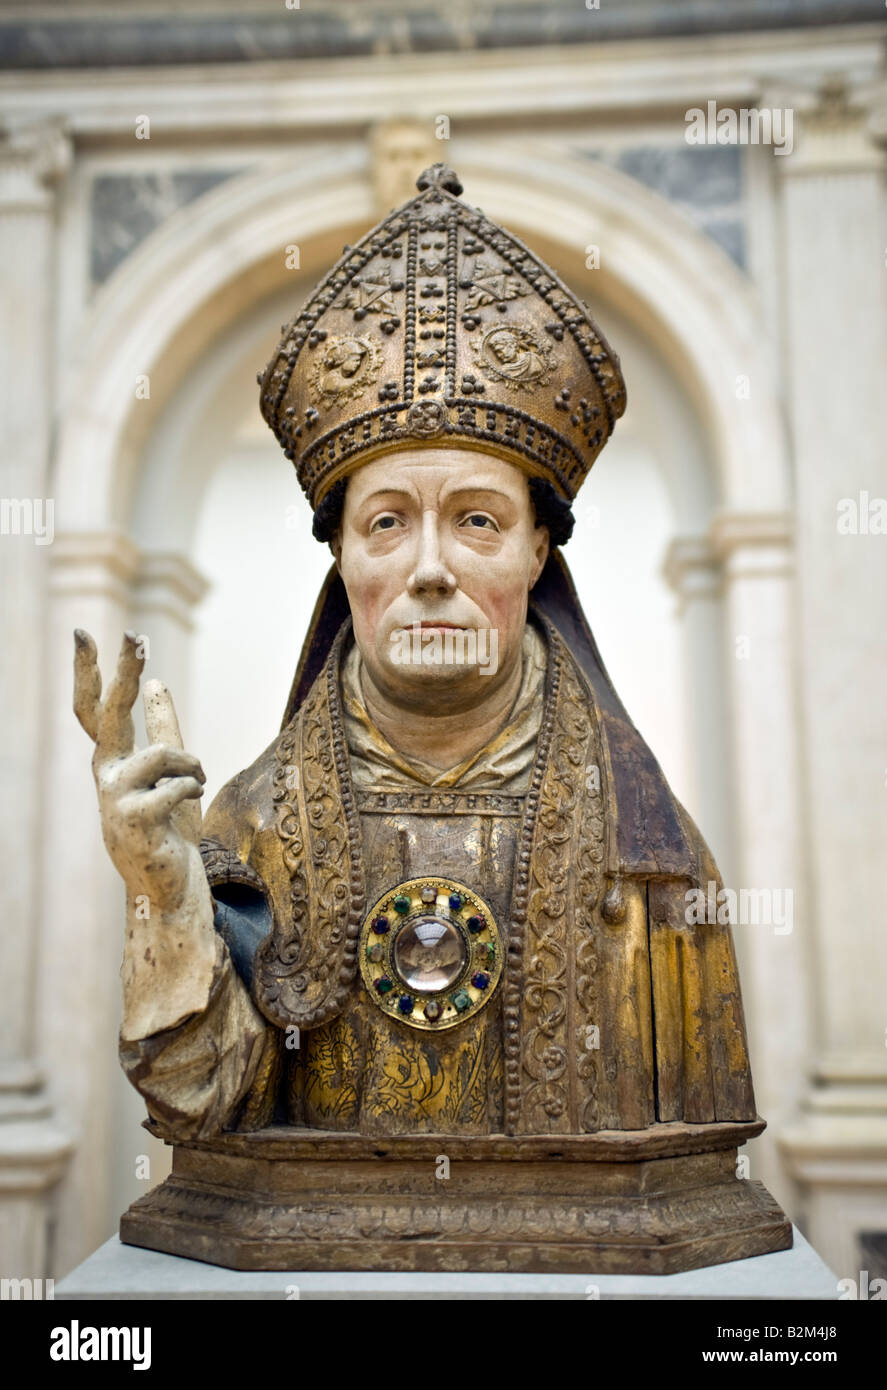 Old wooden bust of bishop in Bode Museum Berlin Germany Stock Photo